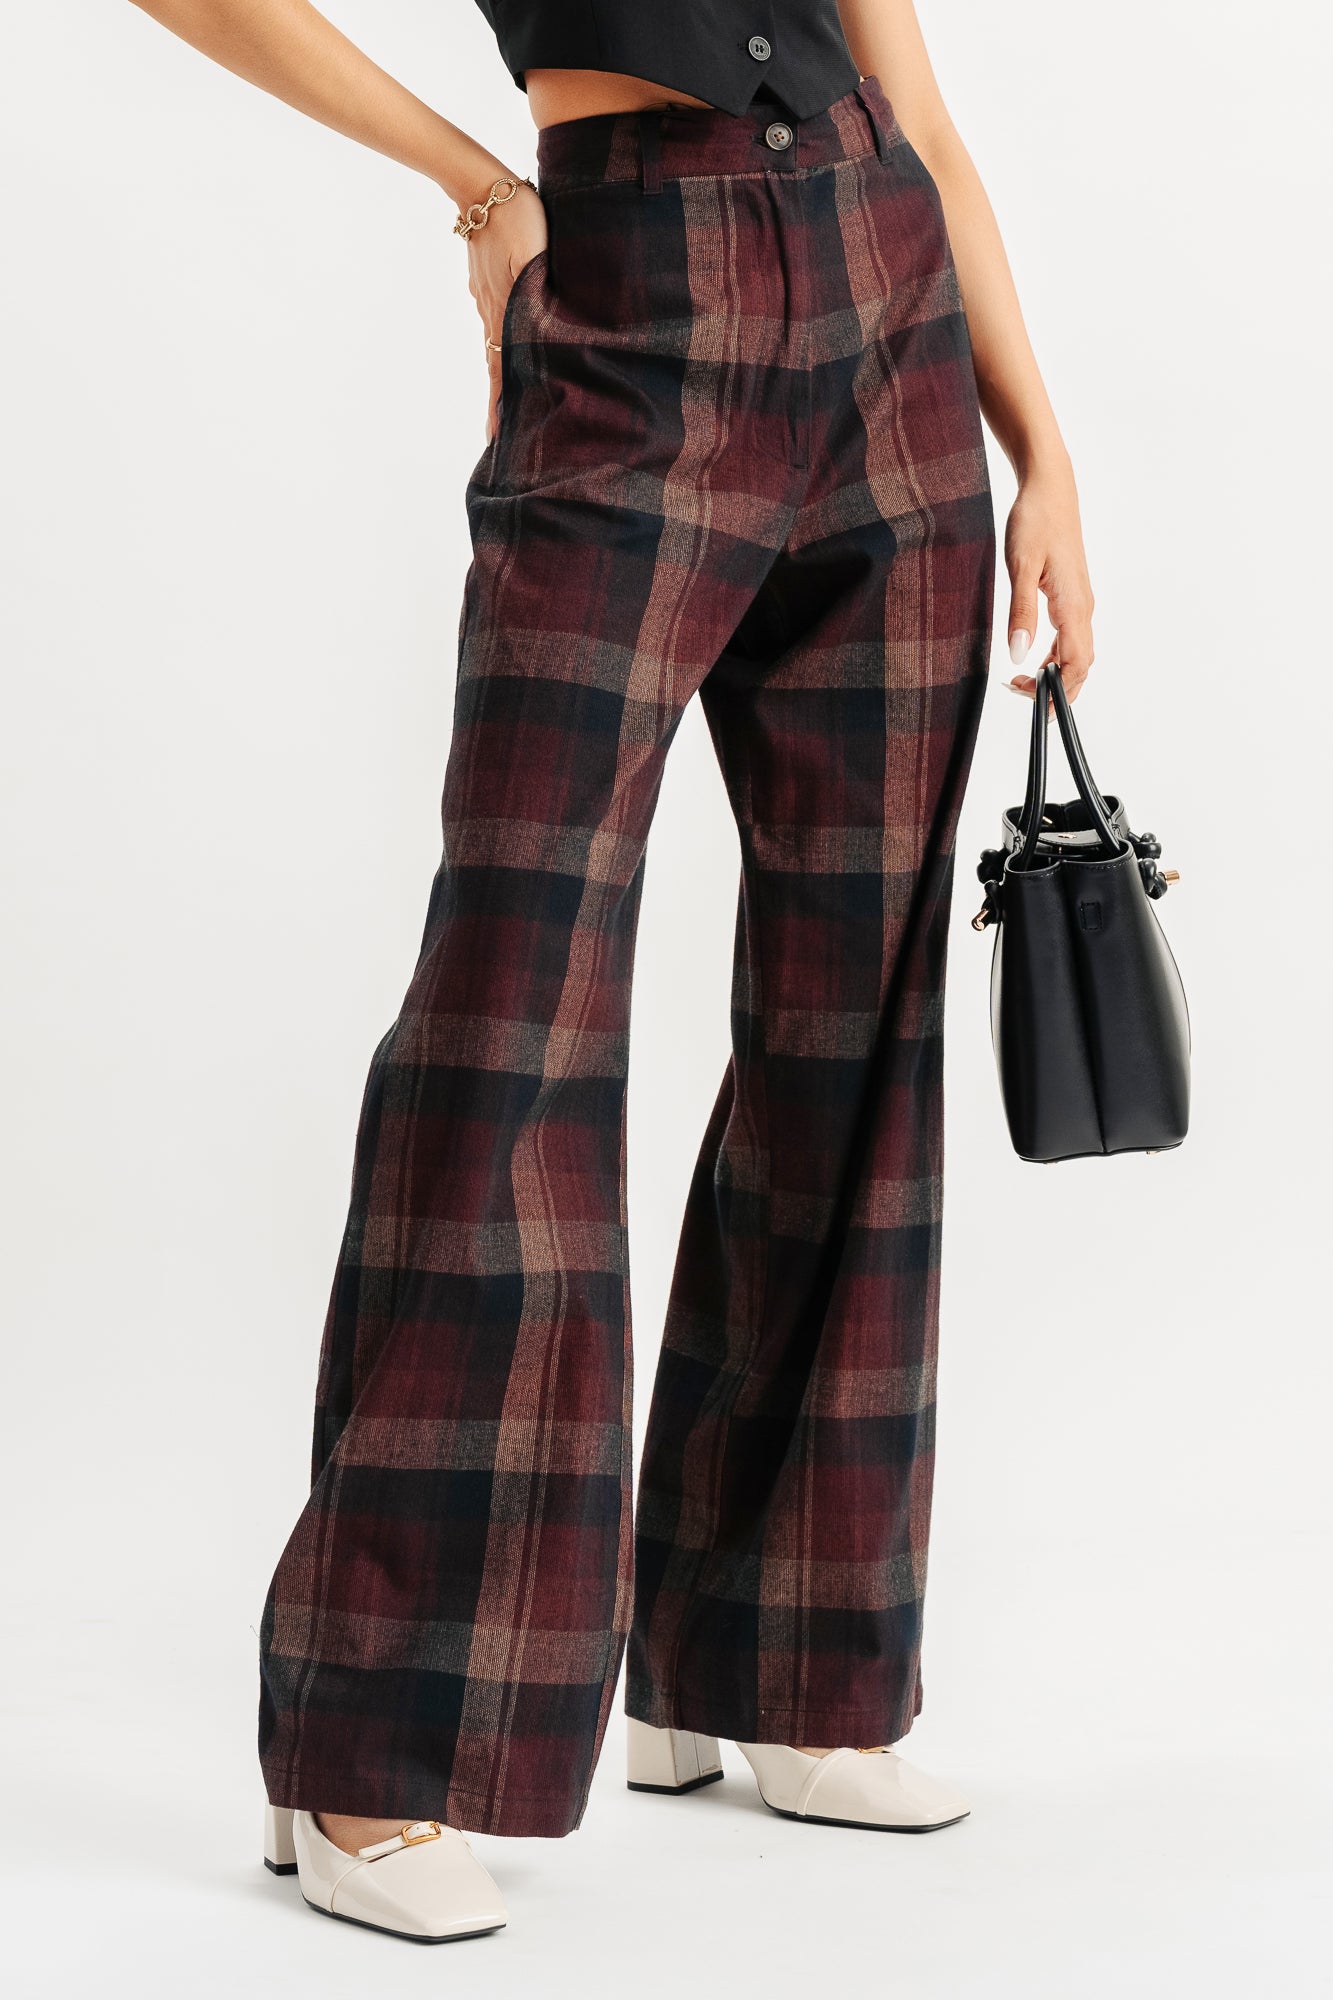 EARTHLY CHECKERED PANTS